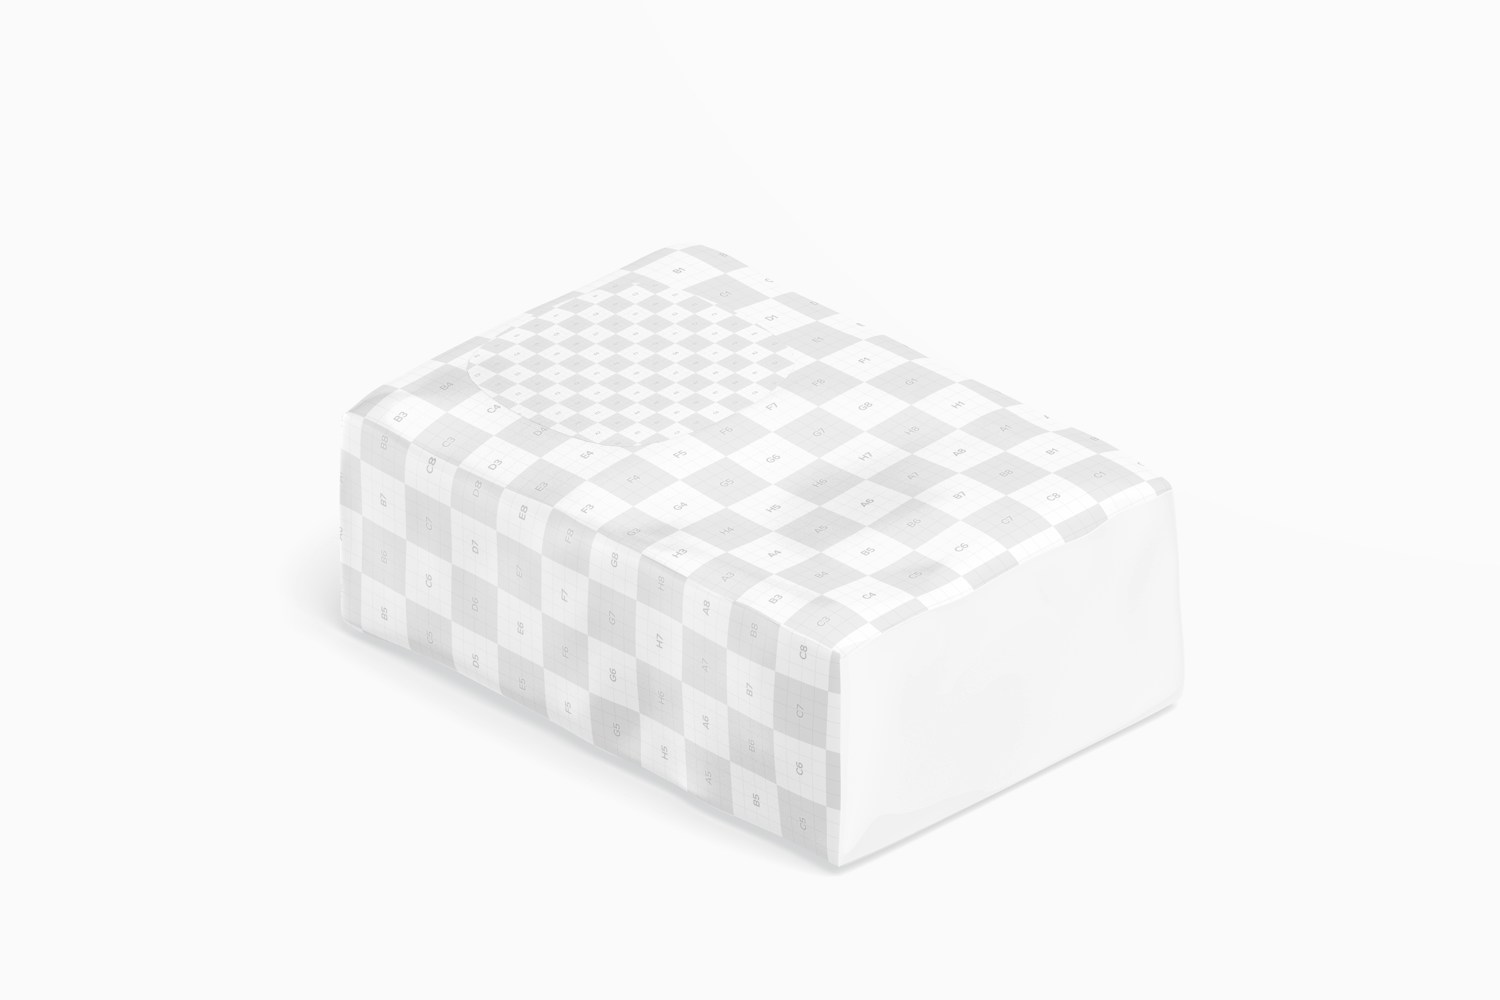 Small Tissue Packet Mockup, Isometric Right View